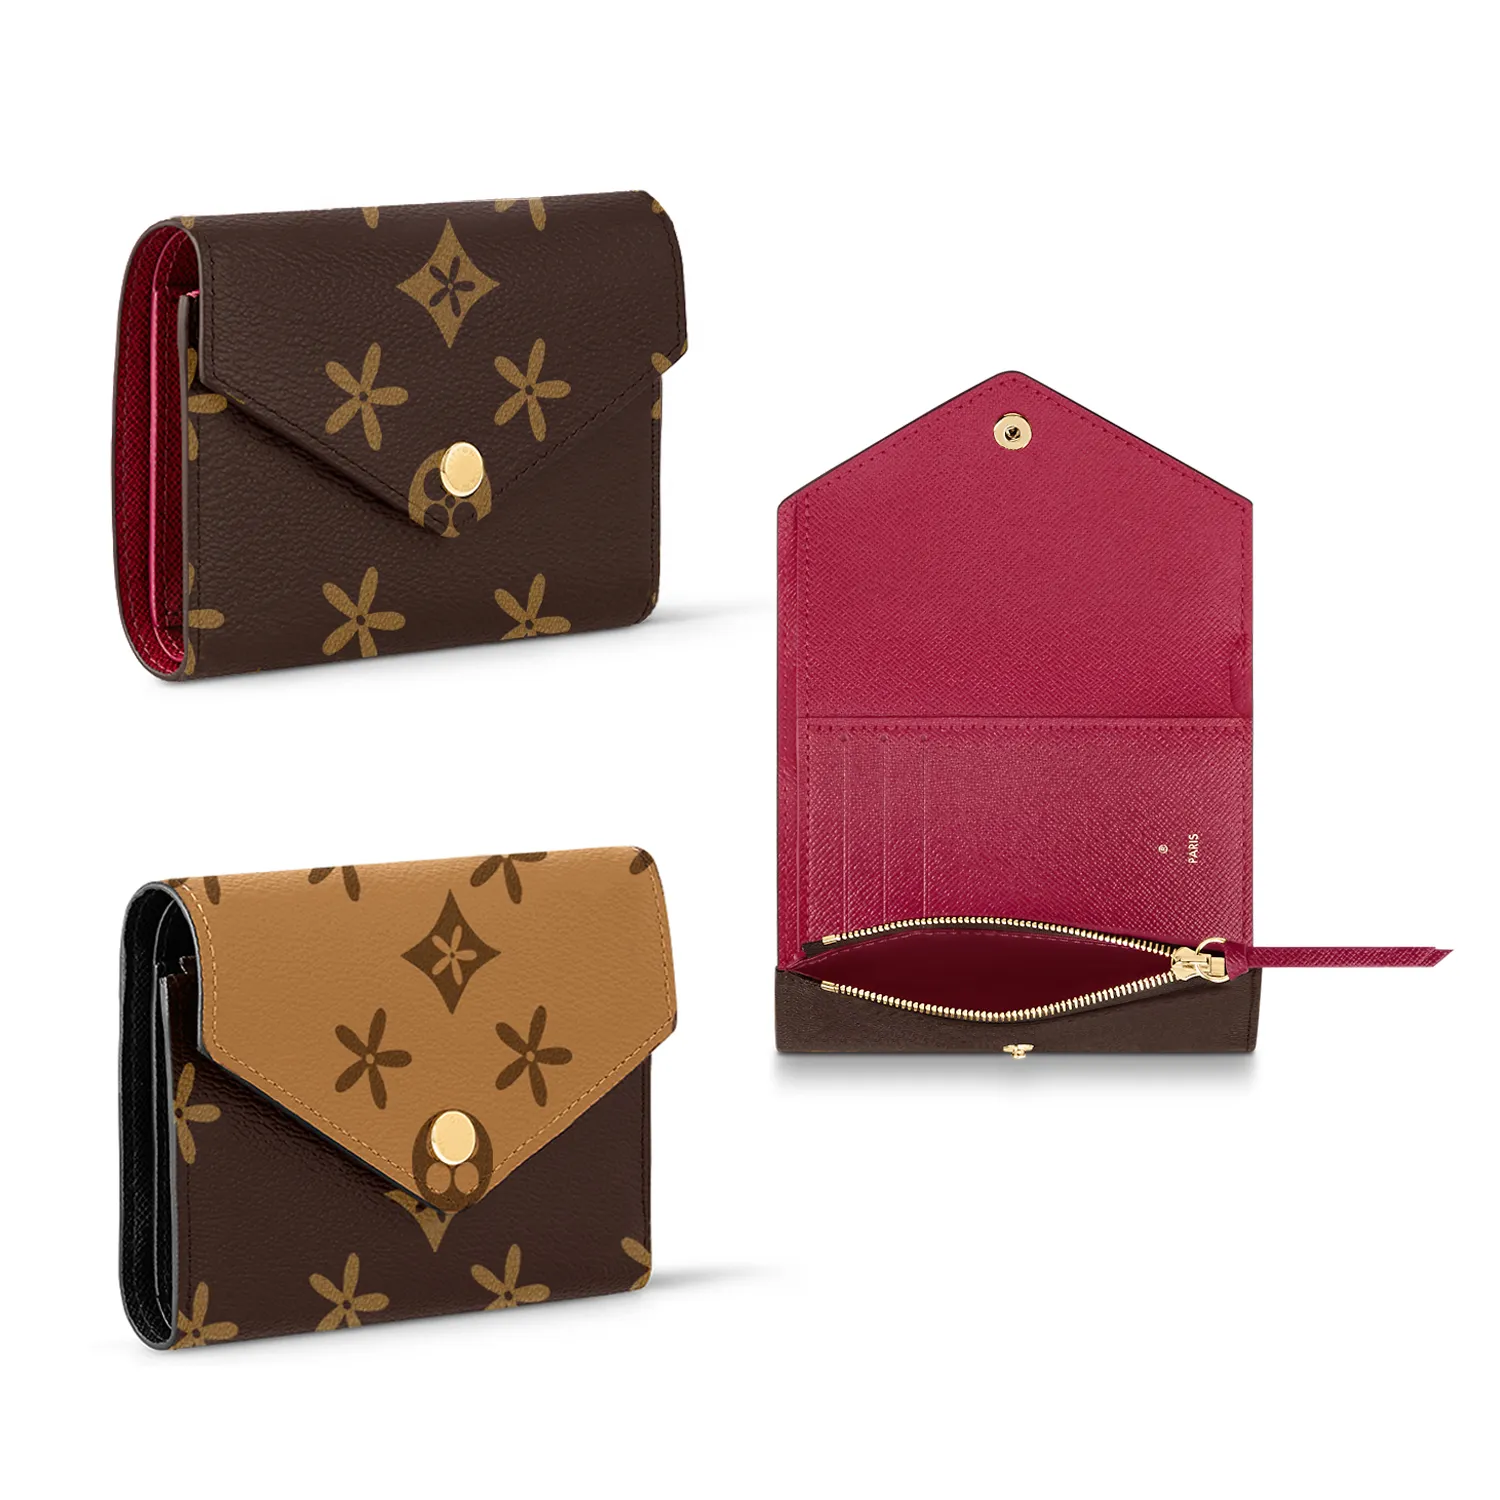 Man Women wallets coin purse card holder luxury Designer Leather Brown flower M41938 victorine wallet Top quality Credit card CardHolder chain purses Key pouch gift